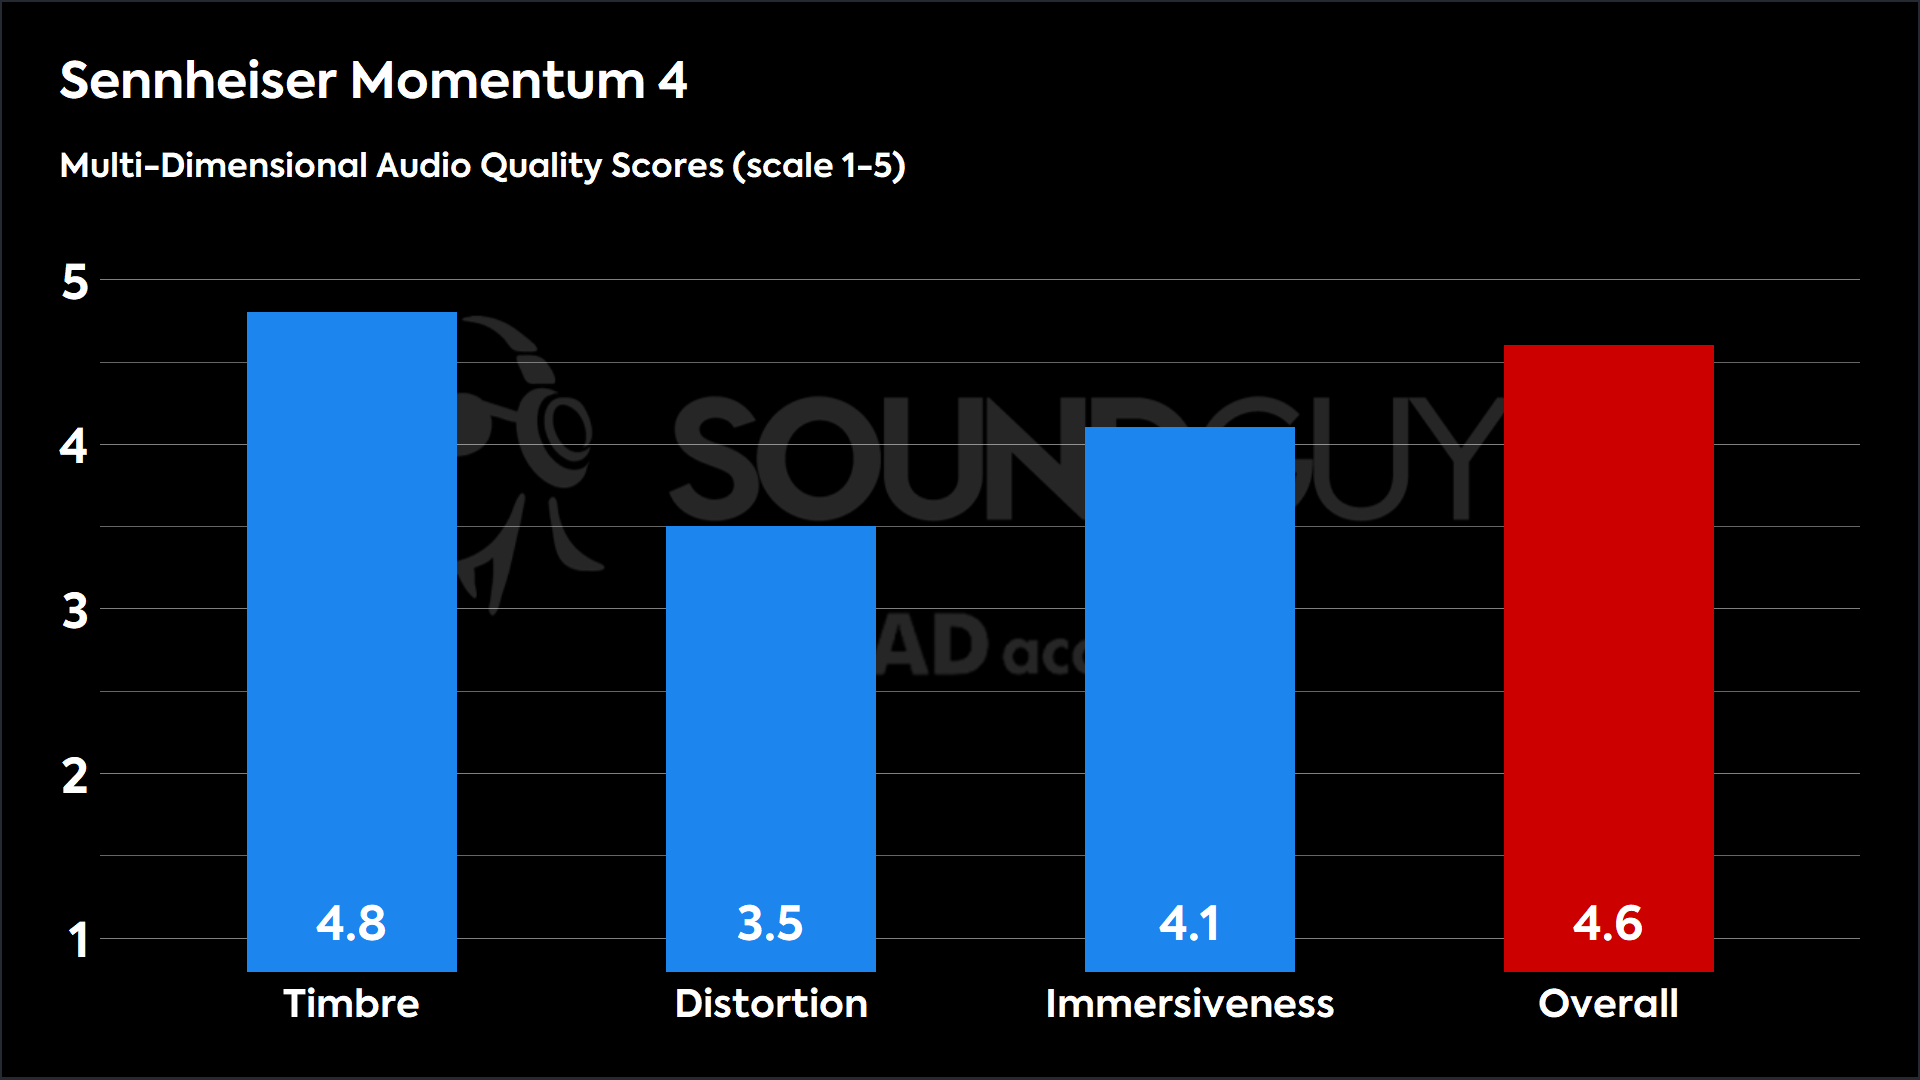 This chart shows the MDAQS results for the Sennheiser Momentum 4 in Default mode. The Timbre score is 4.8, The Distortion score is 3.5, the Immersiveness score is 4.1, and the Overall Score is 4.6.